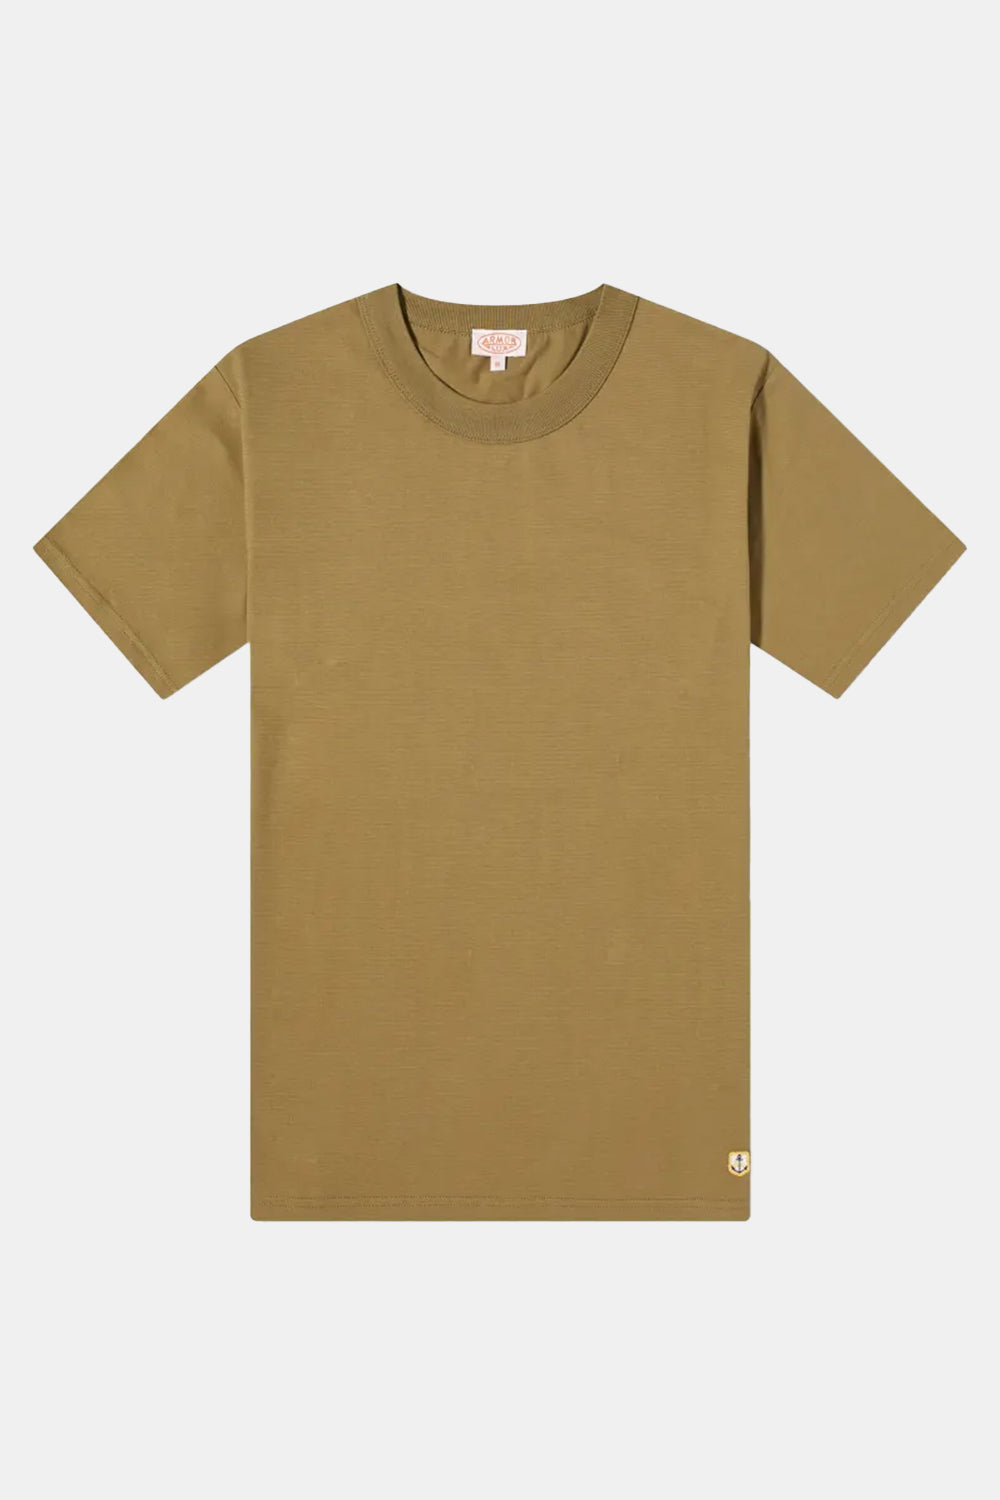 Armor Lux Heritage Organic Callac T-Shirt (Olive Green)